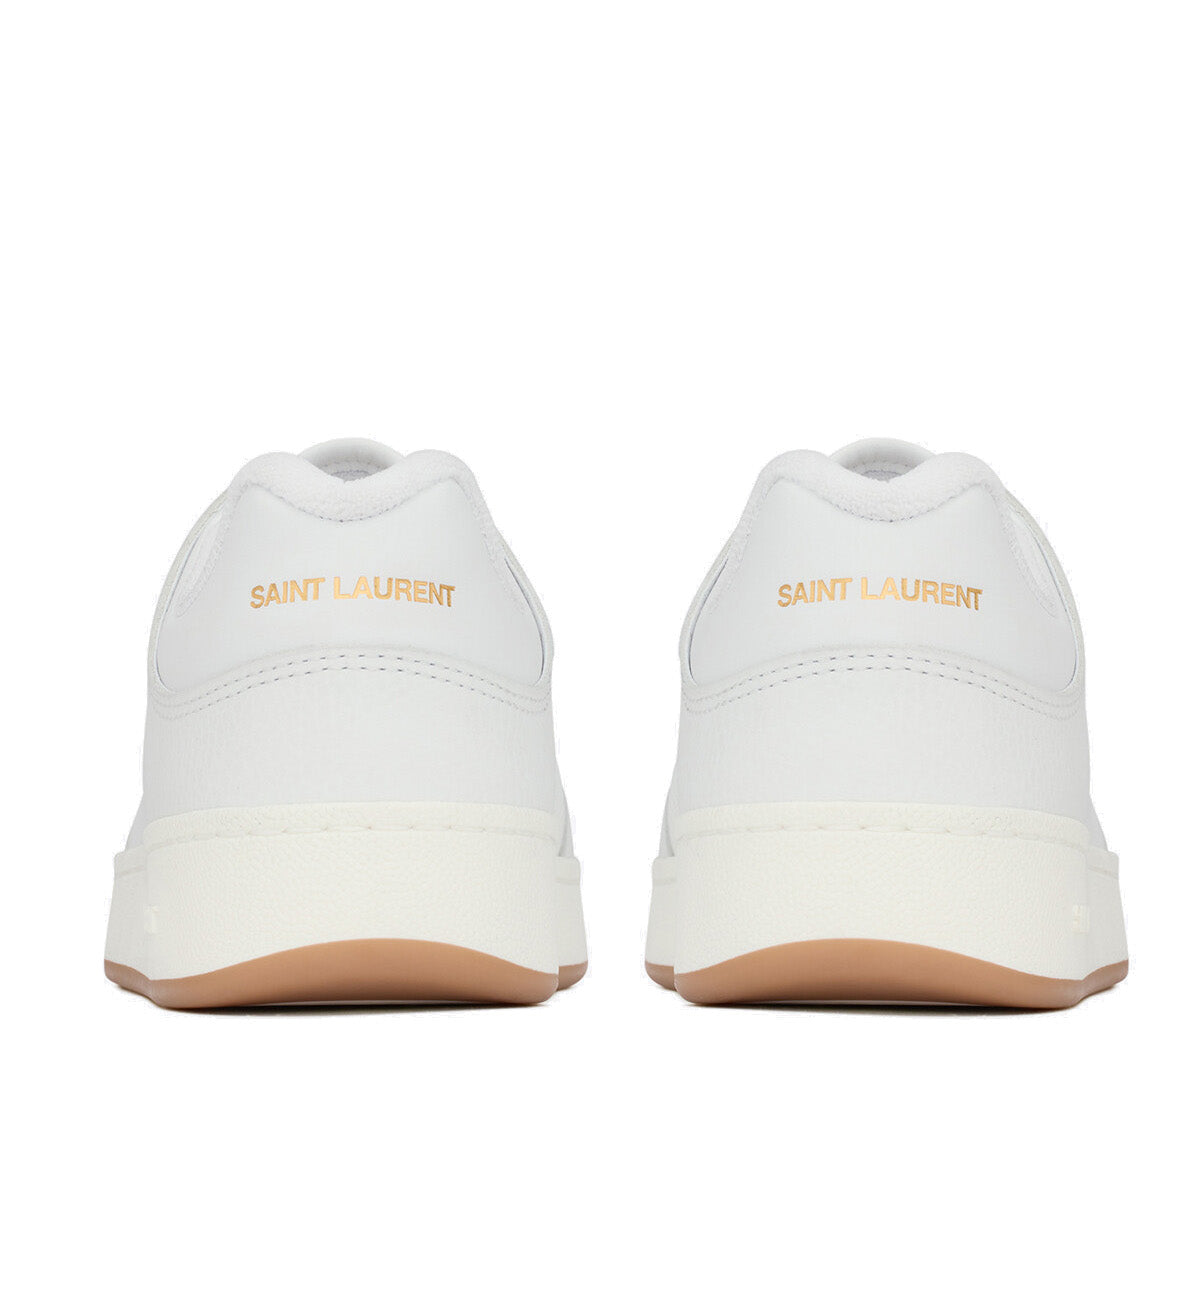 Saint Laurent Perforated Sneaker White & Gold – The Factory KL